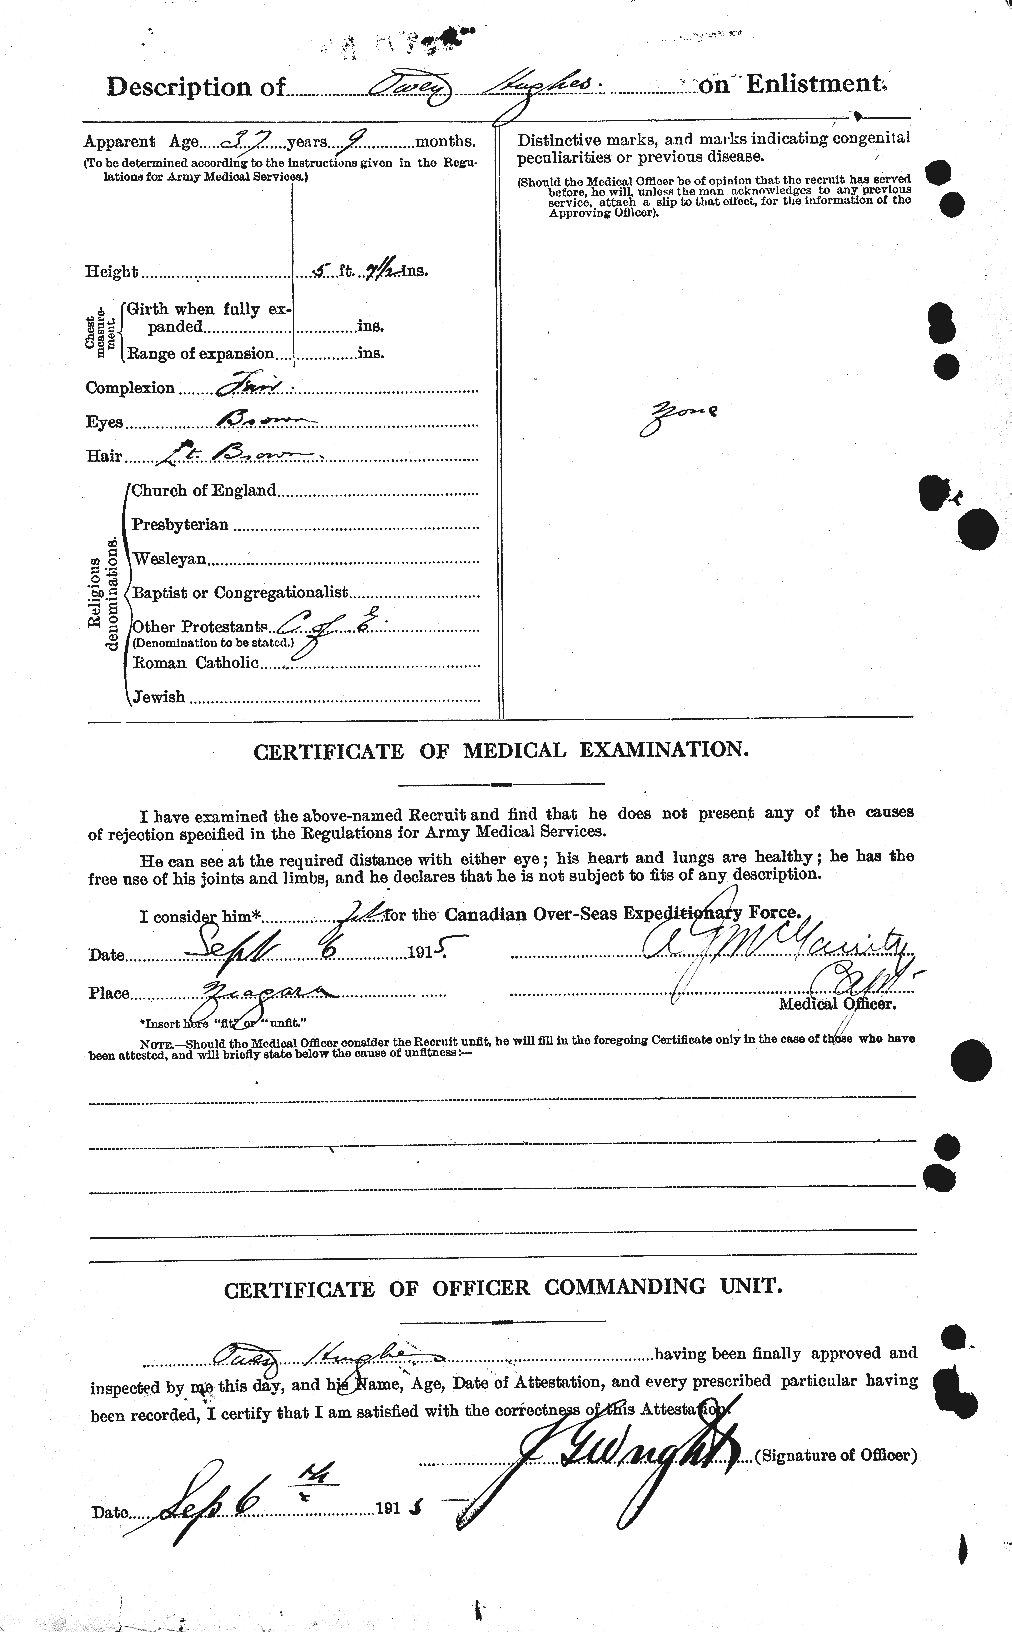 Personnel Records of the First World War - CEF 404140b